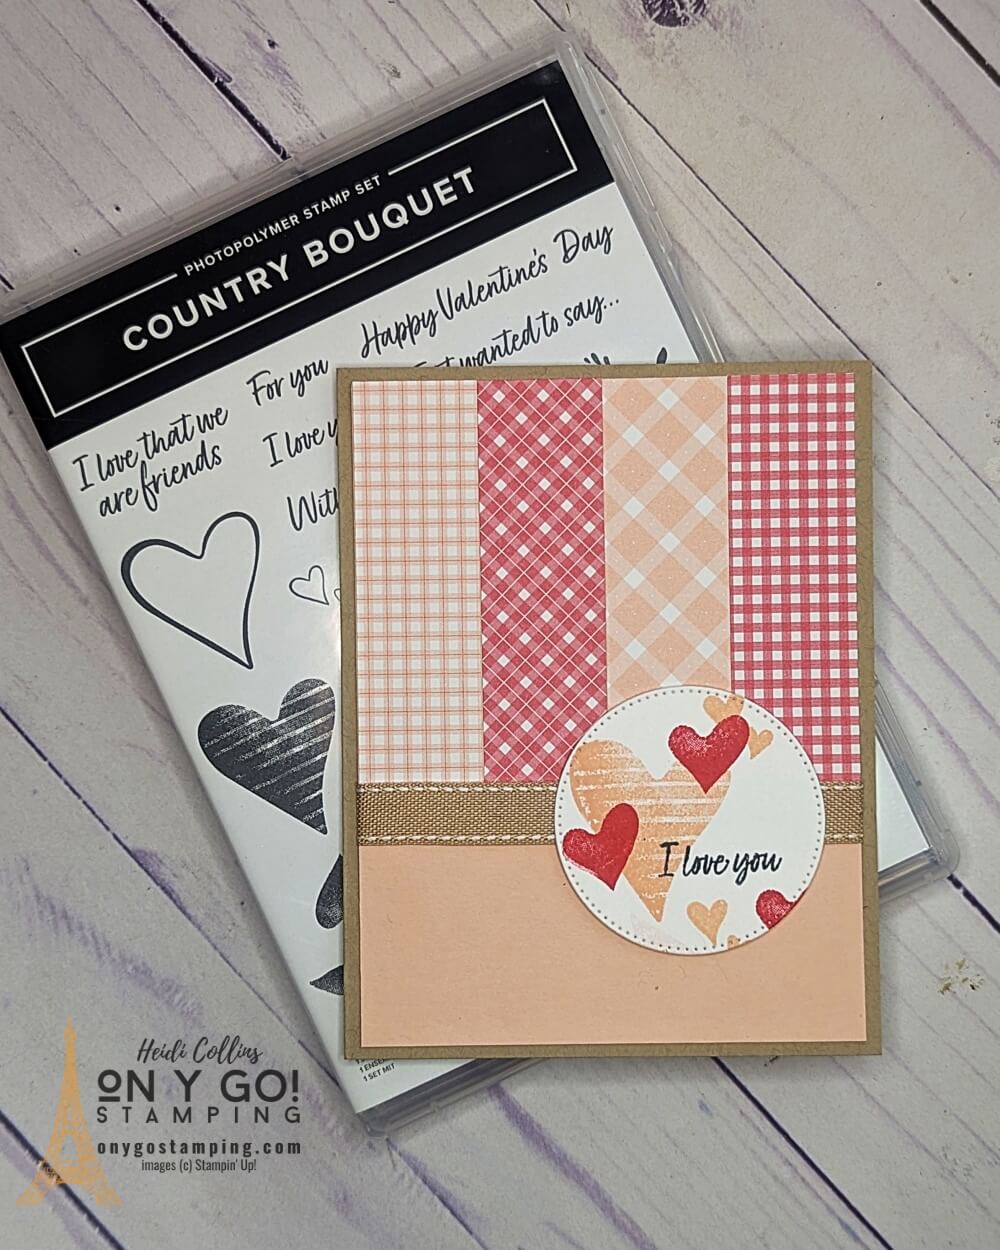 Use the new Country Bouquet stamp set and Country Gingham patterned paper from Stampin' Up!® with a card sketch to create an easy handmade Valentine's Day card.